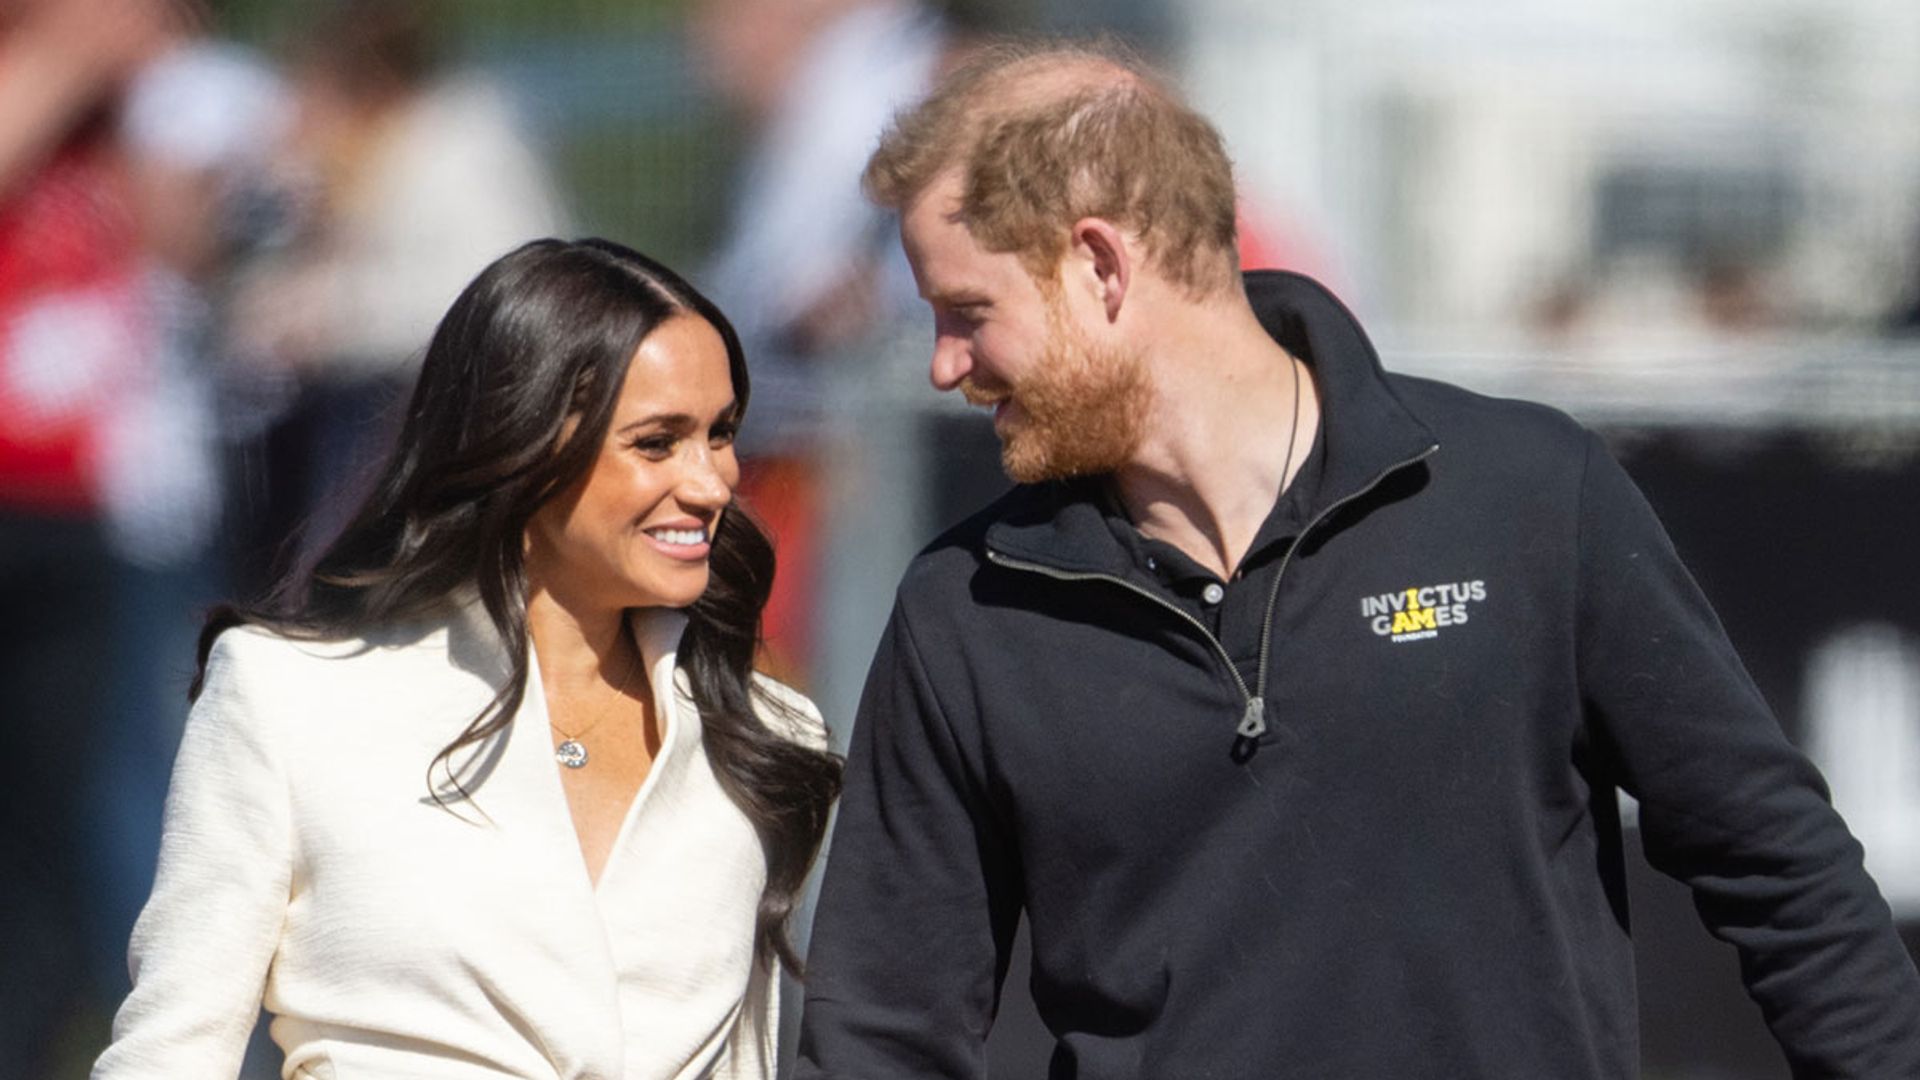 Rare sighting of Archie on Prince Harry and Meghan Markle's family day out